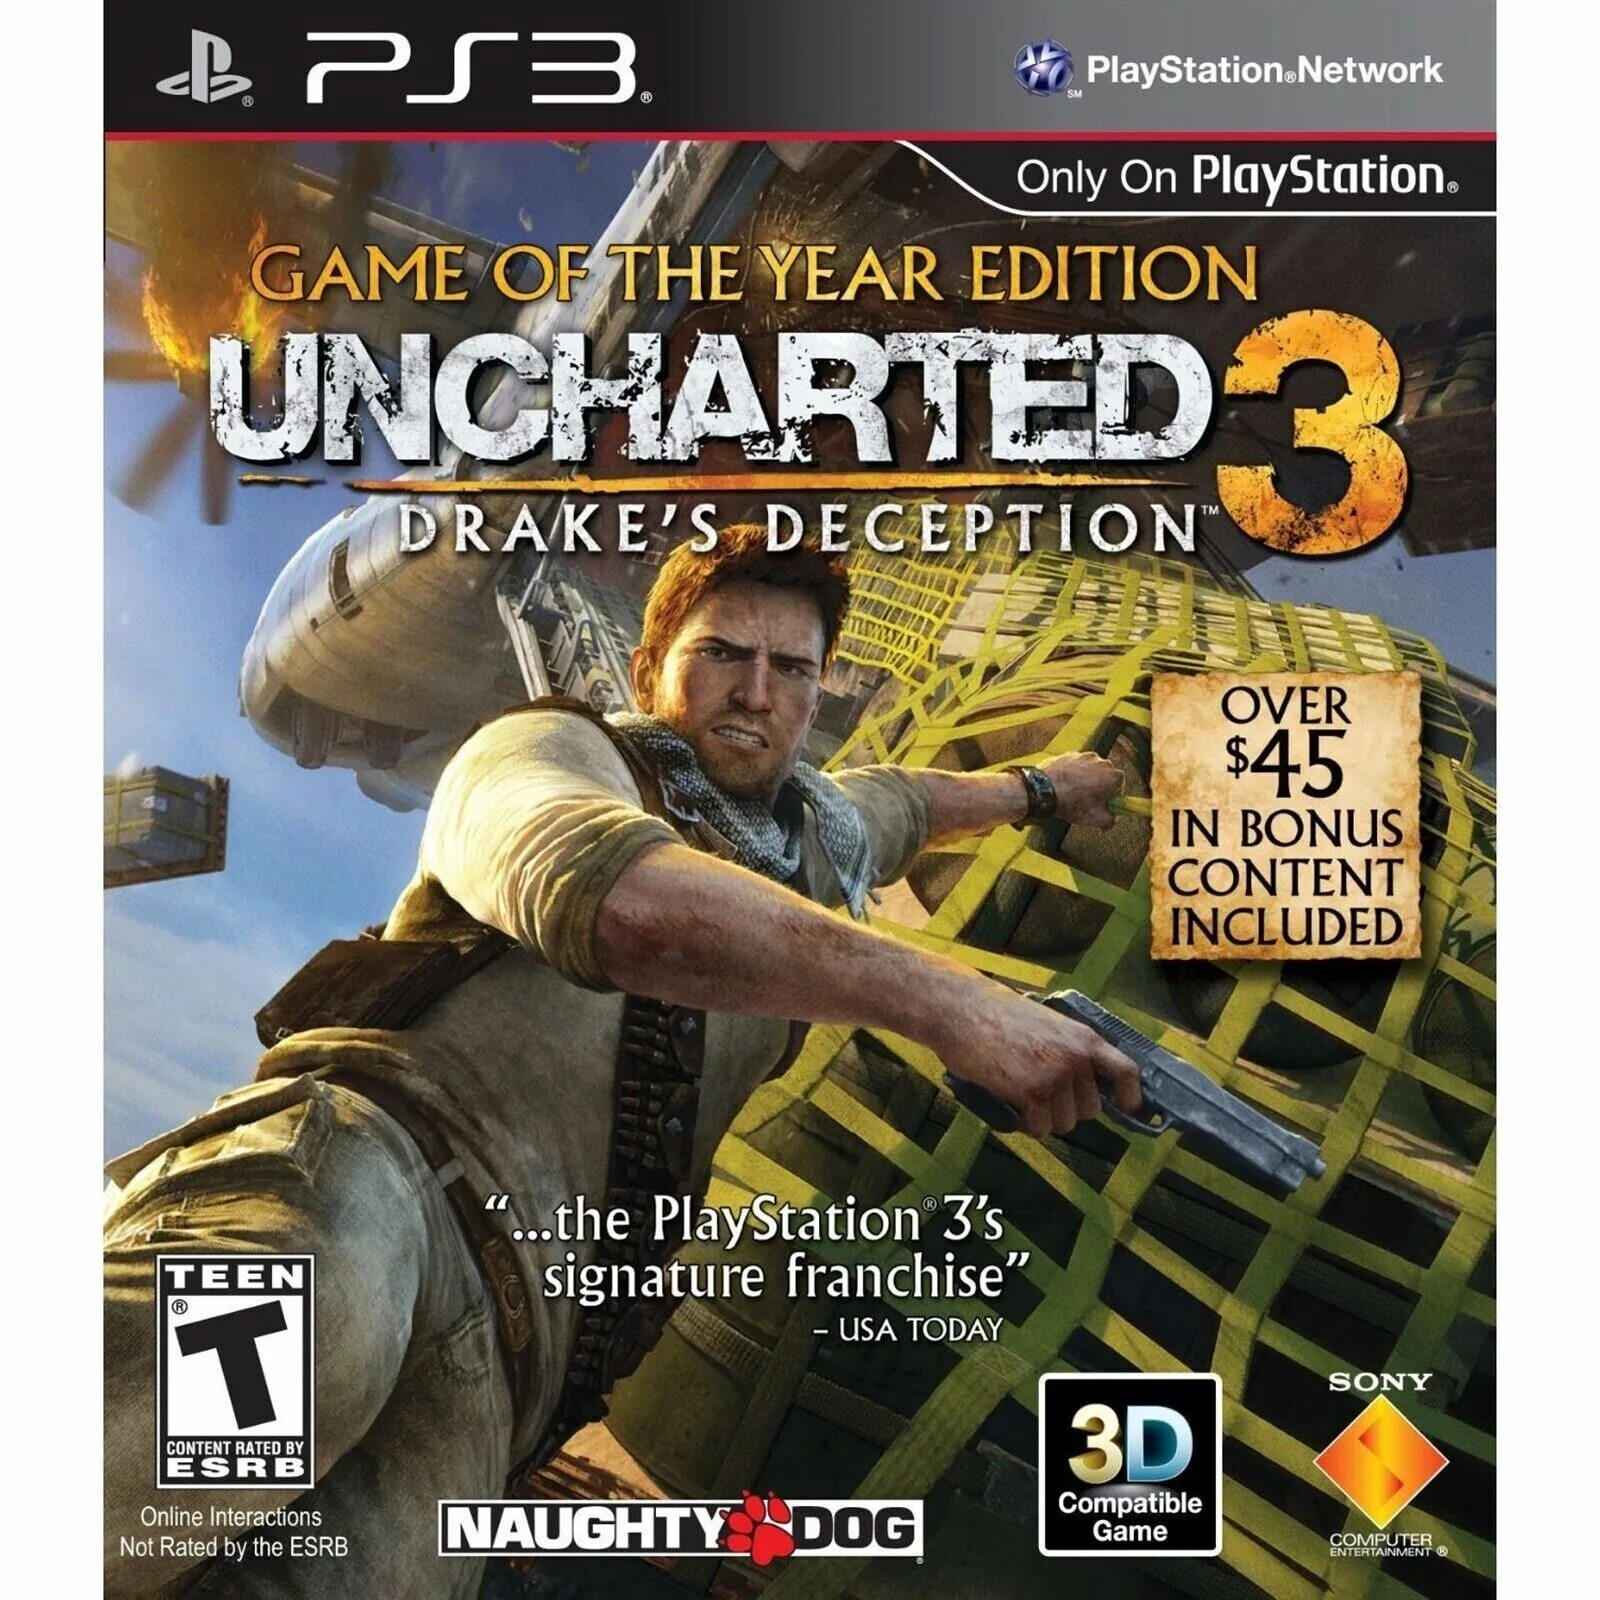 Game of the year игры. Uncharted 3 ps3. Uncharted игра на пс3. Uncharted 3 иллюзии Дрейка ps3. Uncharted 3 ps3 диск.